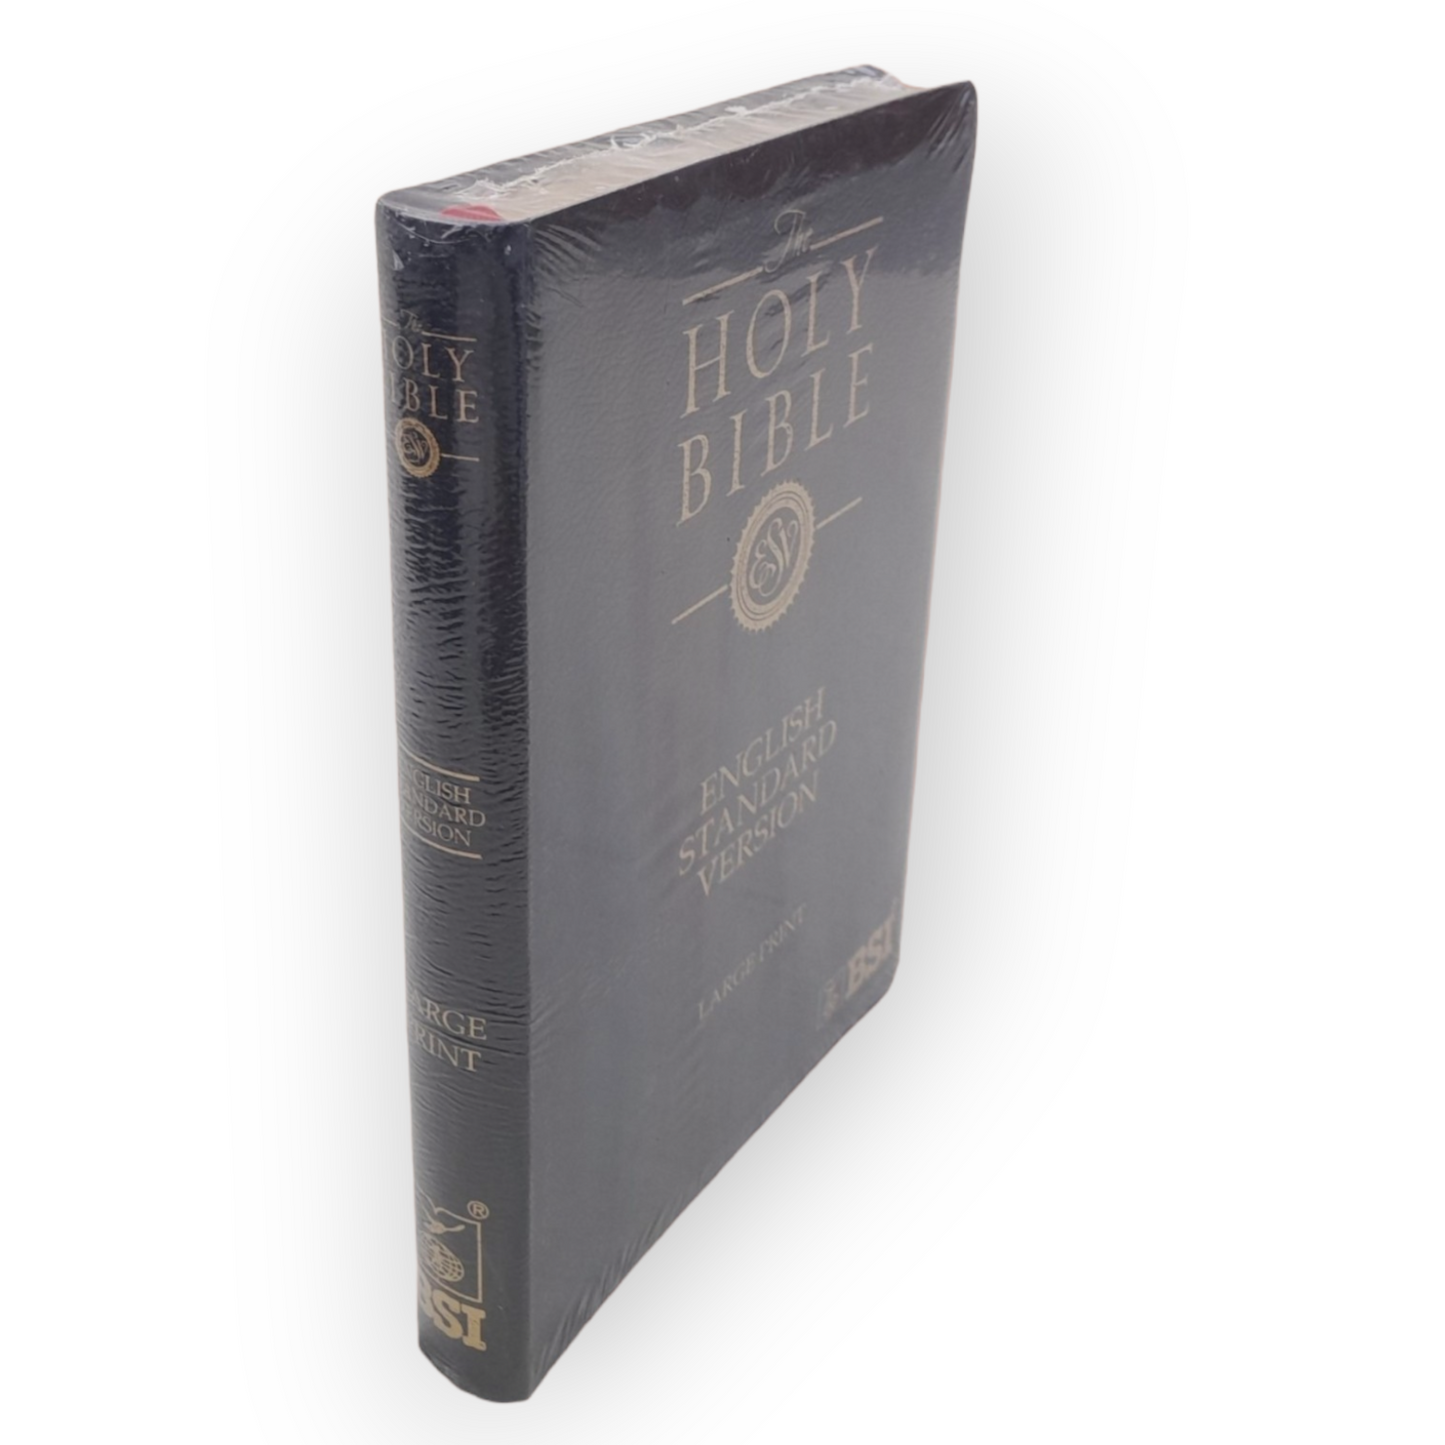 The Holy English Standard Version Bible Golden Edge Black Color Bound